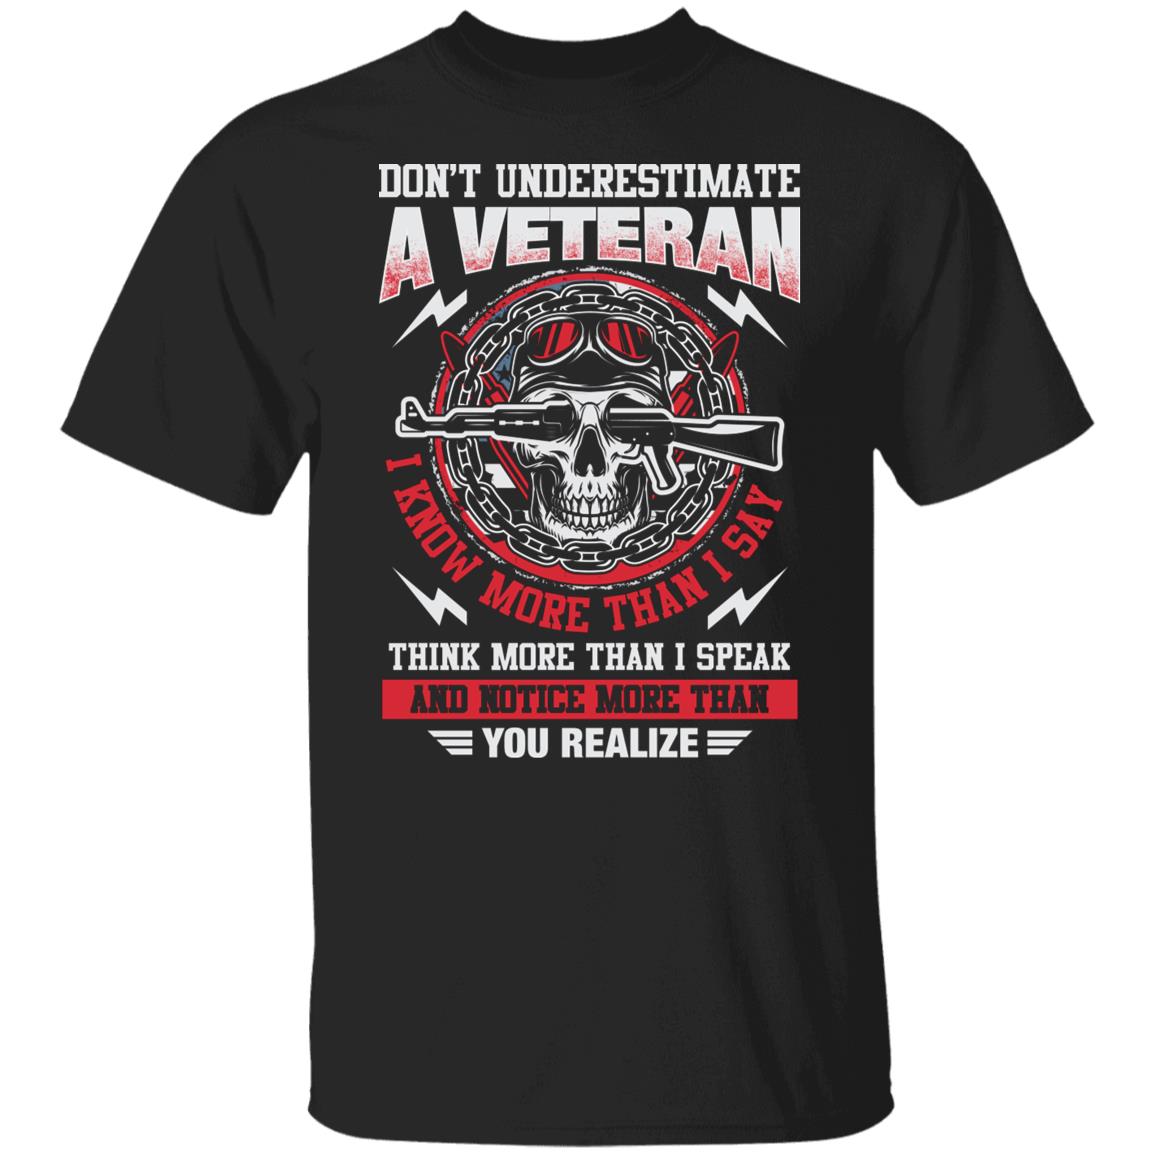 Don't Underestimate a Veteran Tee Shirt I Know More Than I Say Think More Than I Speak